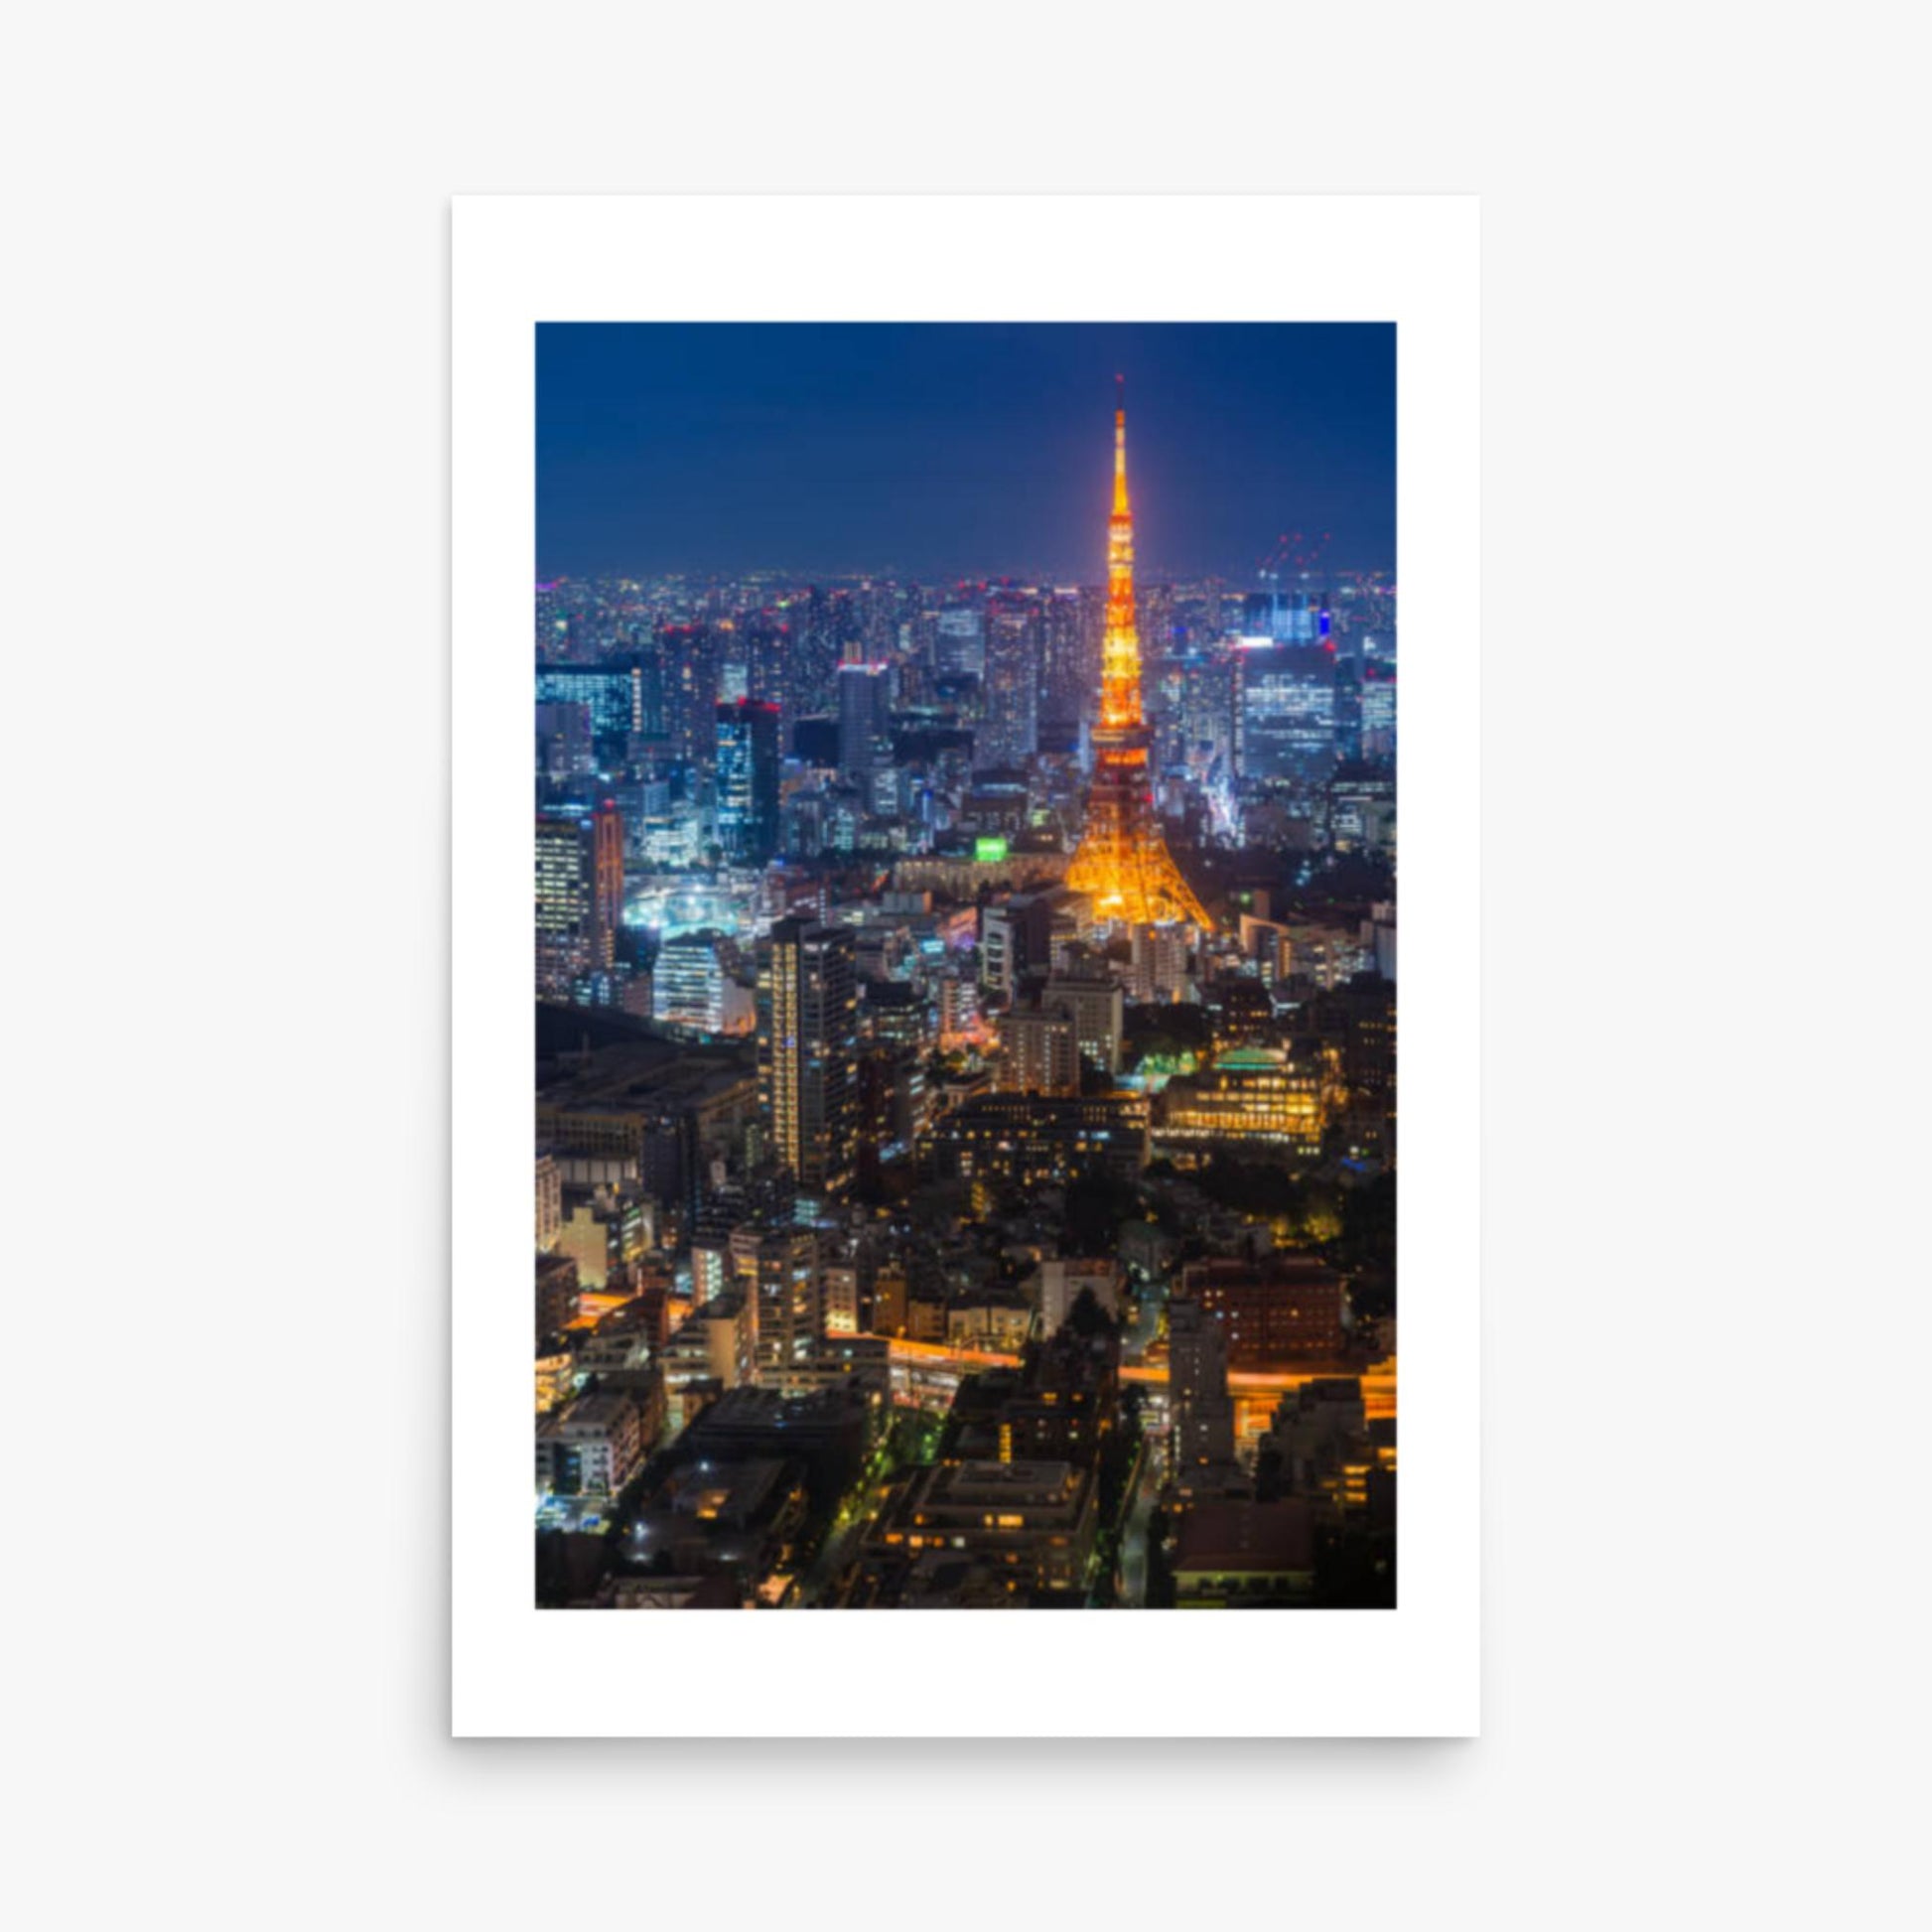 Tokyo Tower illuminated 24x36 in Poster